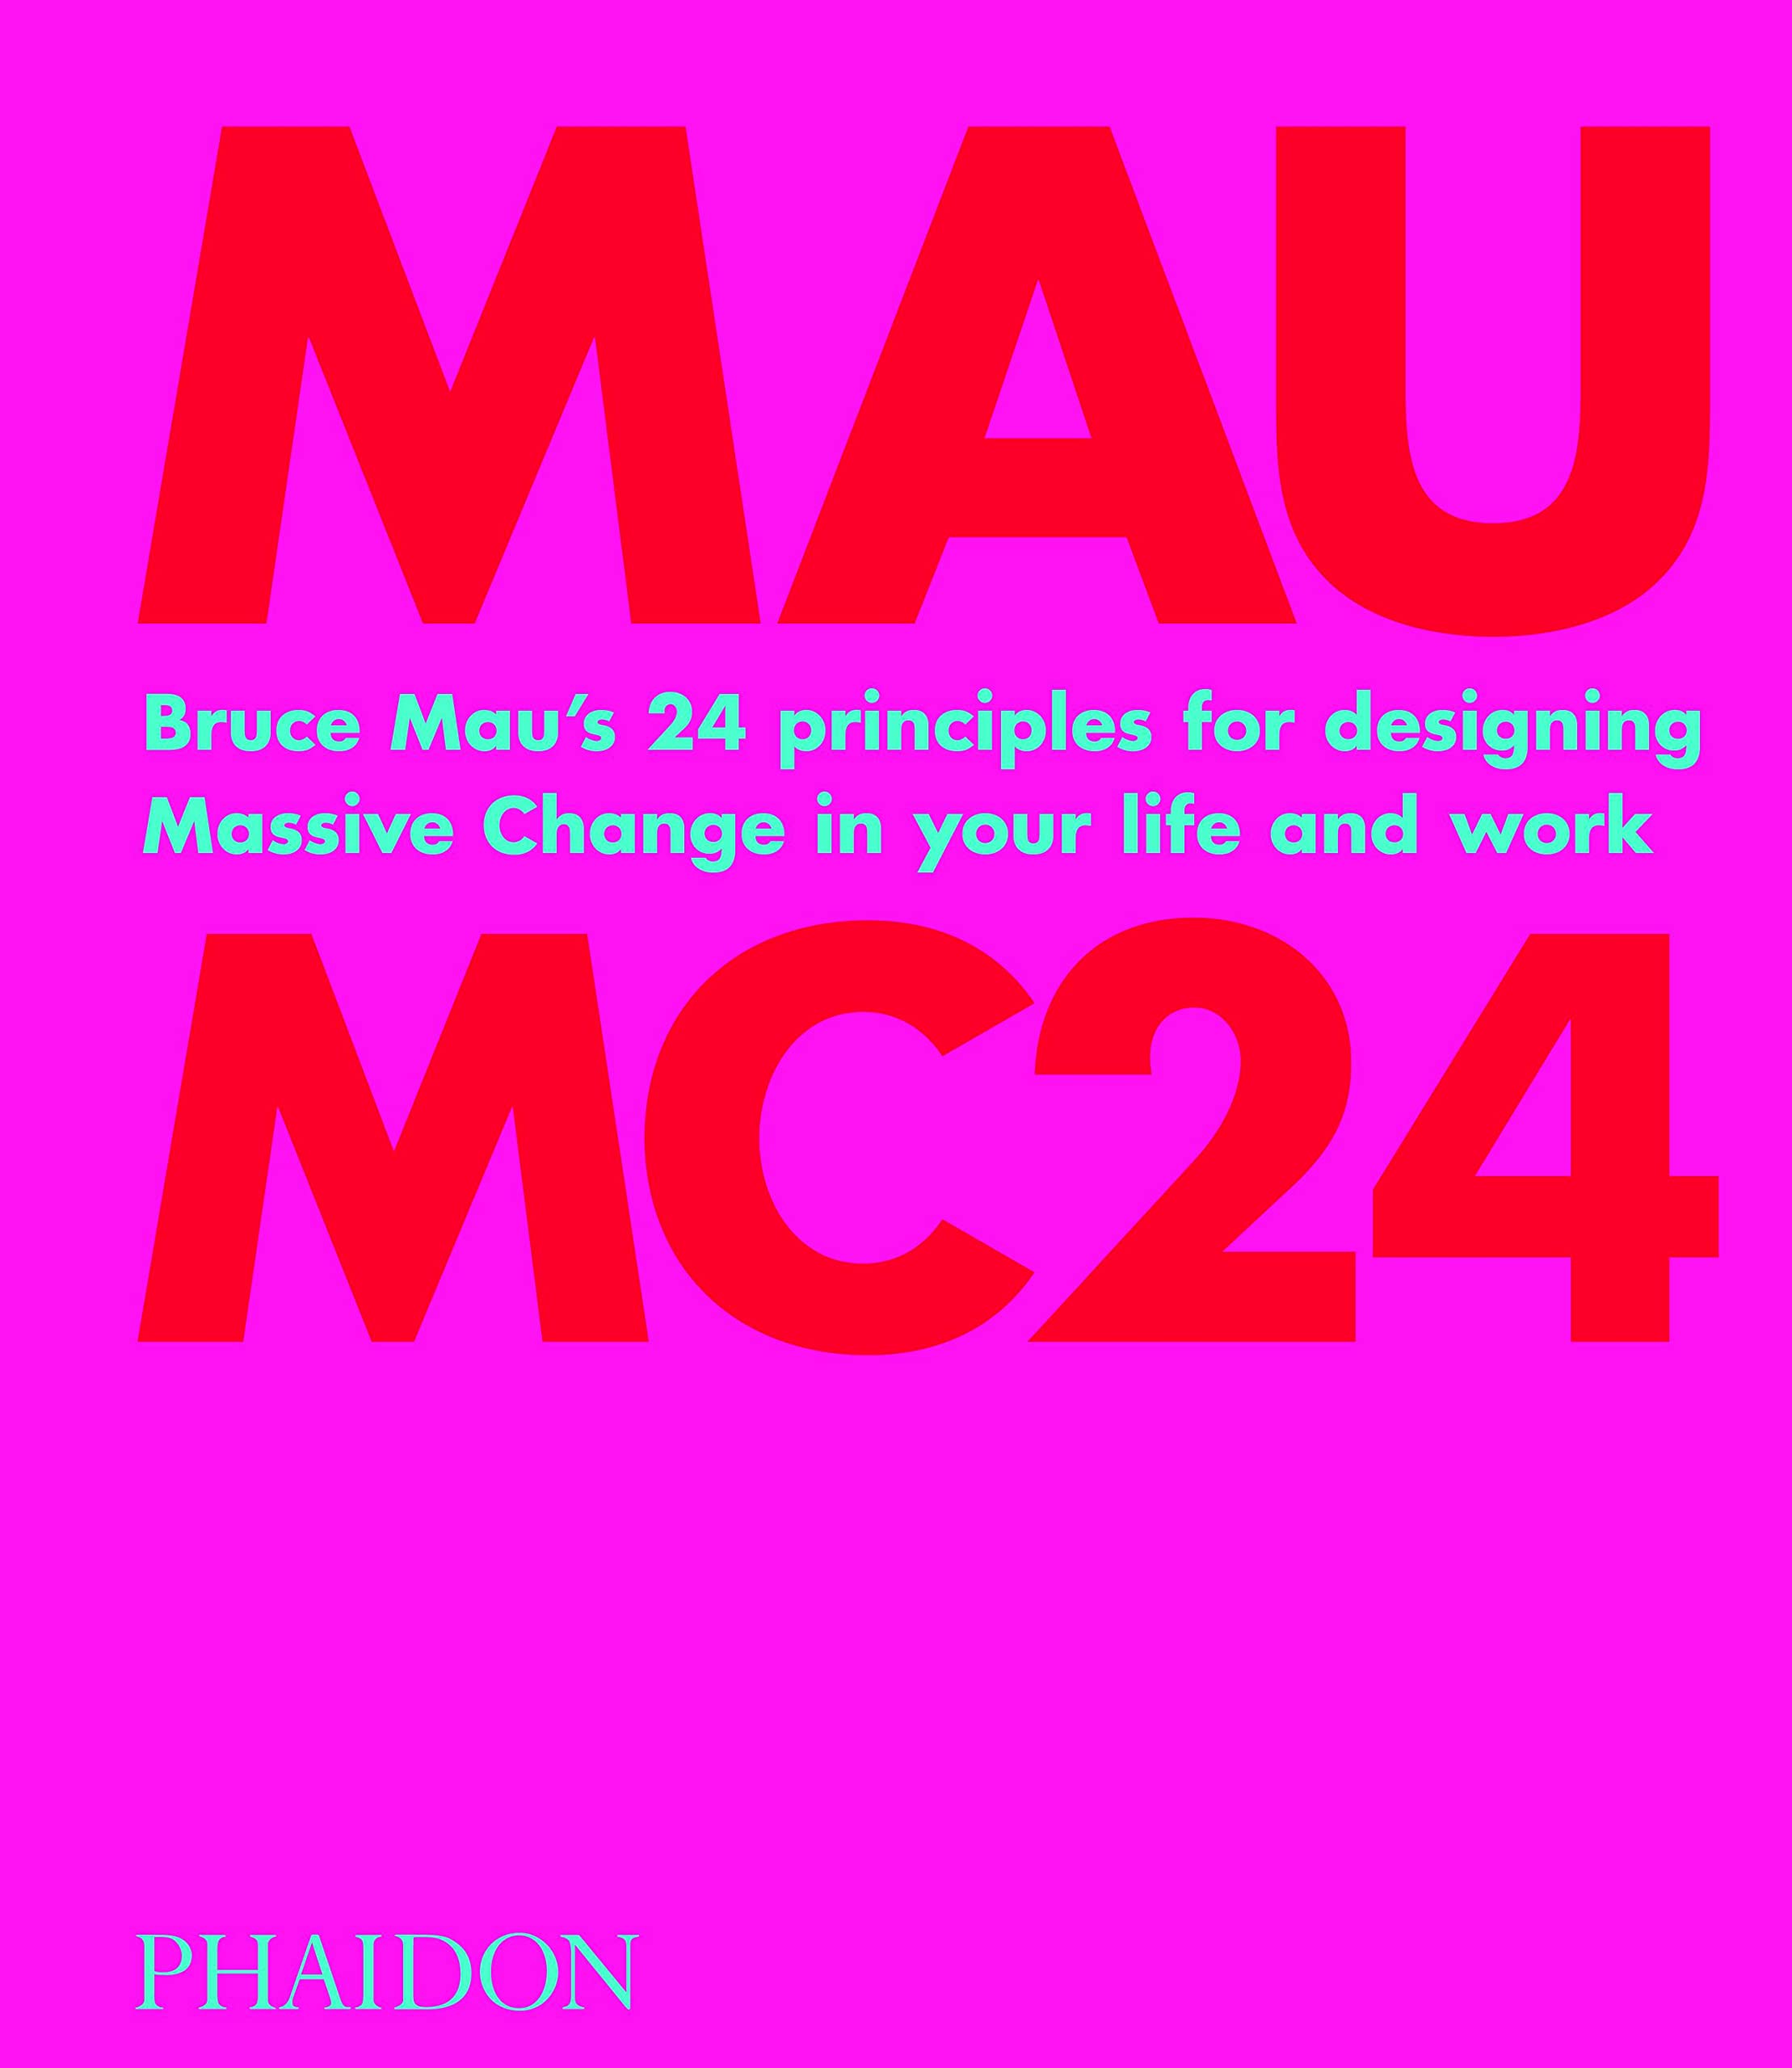 Bruce Mau: MC24: Bruce Mau's 24 Principles for Designing Massive Change in your Life and Work